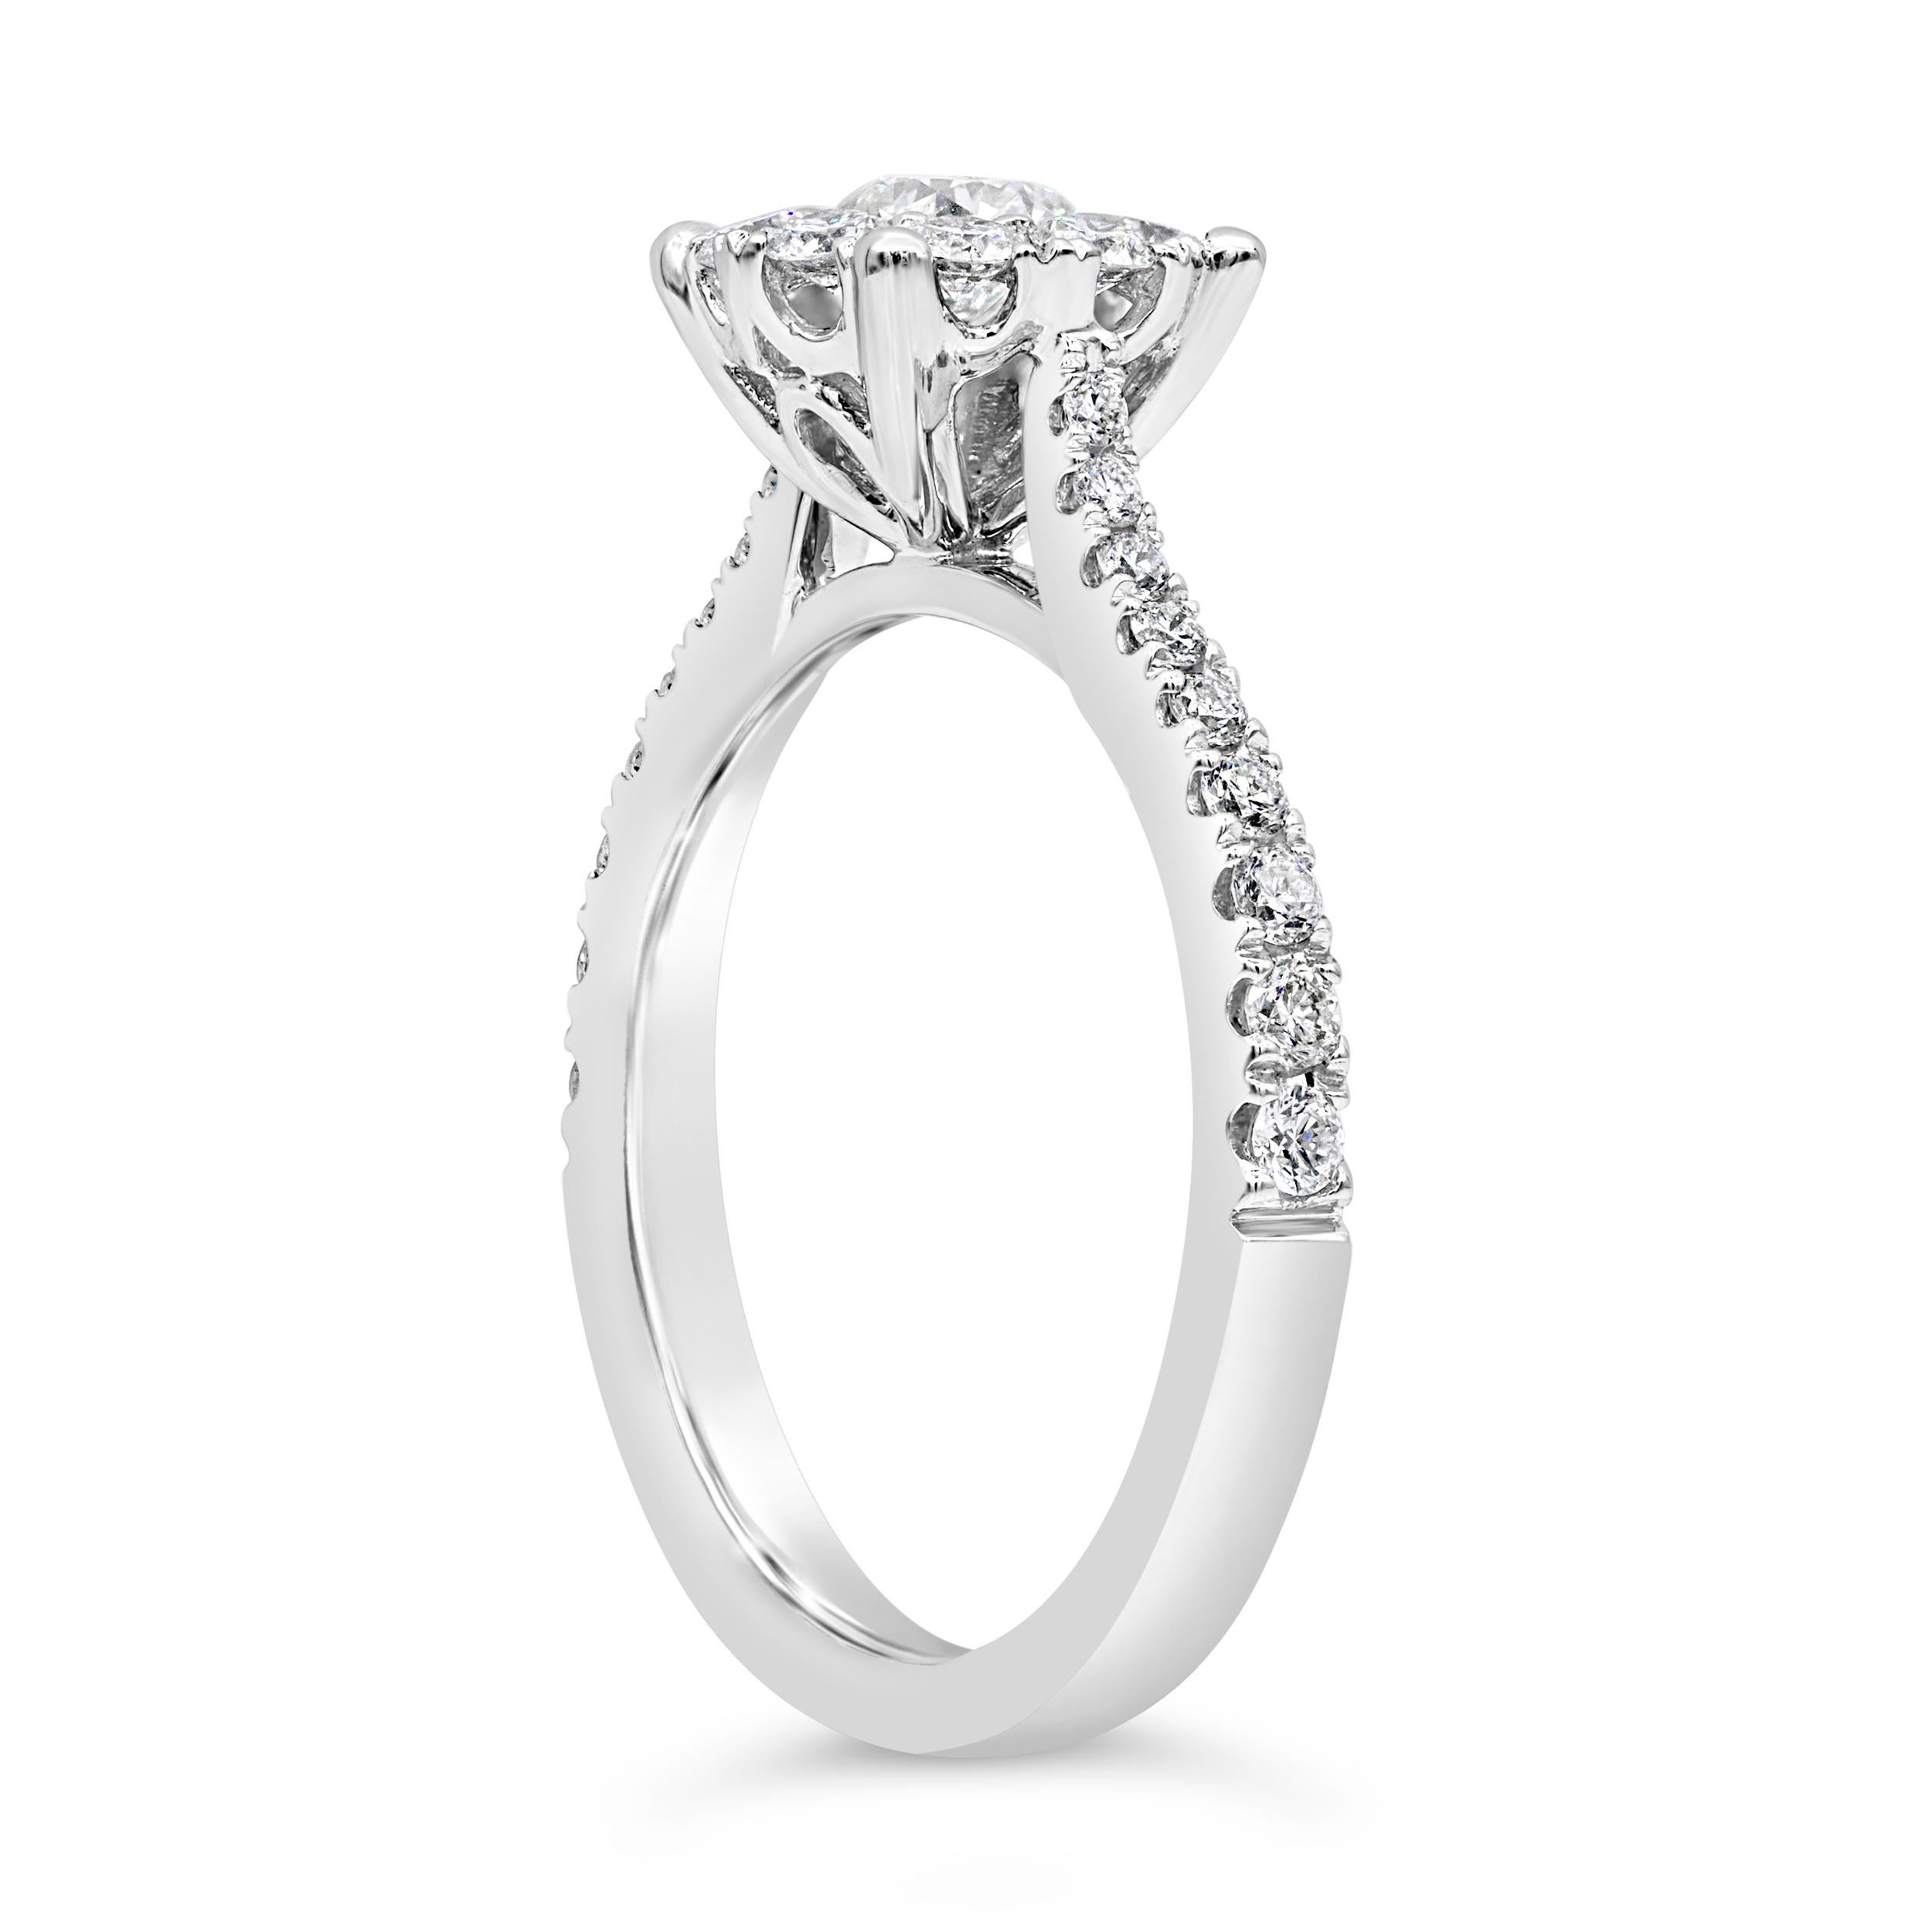 A unique engagement ring style showcasing a cluster of round brilliant diamonds to make it look like one large center diamond! Set on an 18 karat white gold mounting accented with diamonds. Diamonds weigh 0.93 carats total. Size 6.5 US (Sizable upon